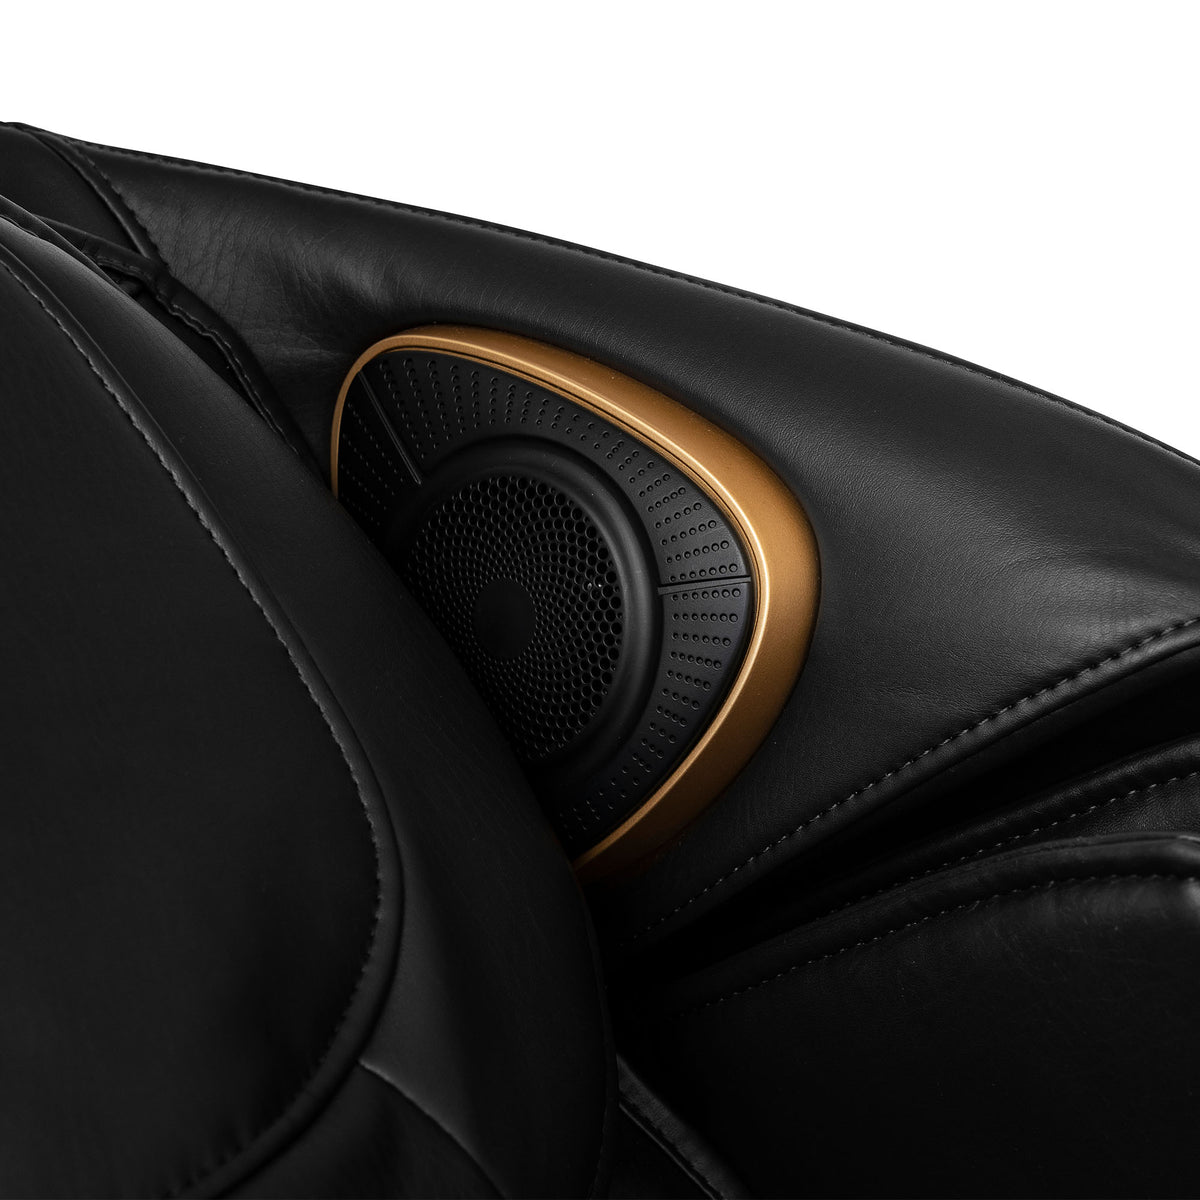 Rearview of the built-in speaker on a black leather Inner Balance Wellness Jin 2.0 Massage Chair